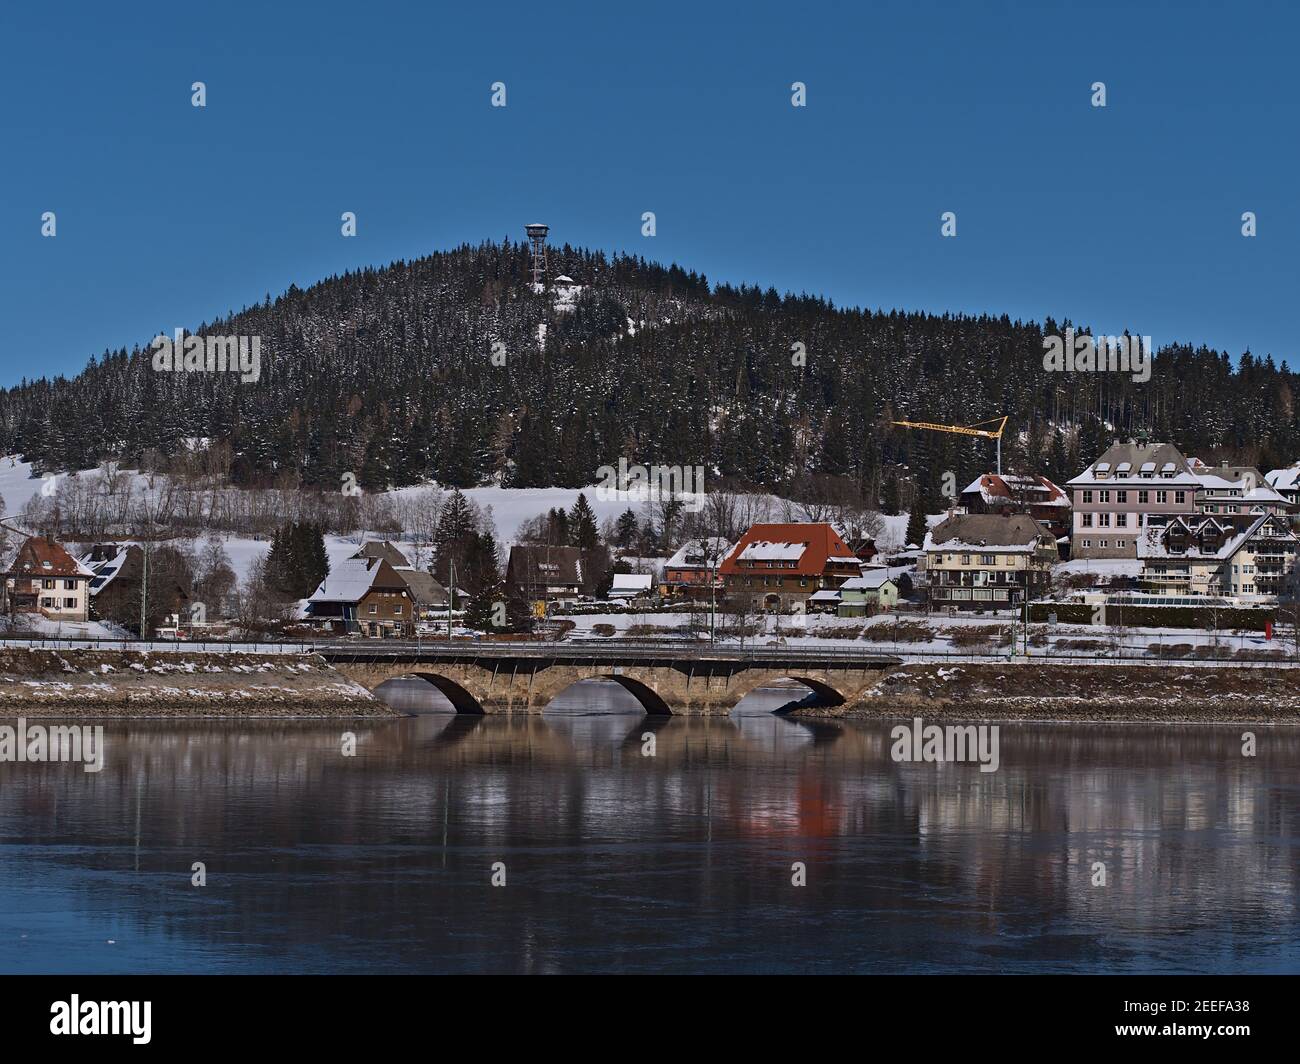 Tranquil view of spa resort Schluchsee village with railway bridge reflected on the frozen lake and observation tower Riesenbühlturm on hill in winter. Stock Photo